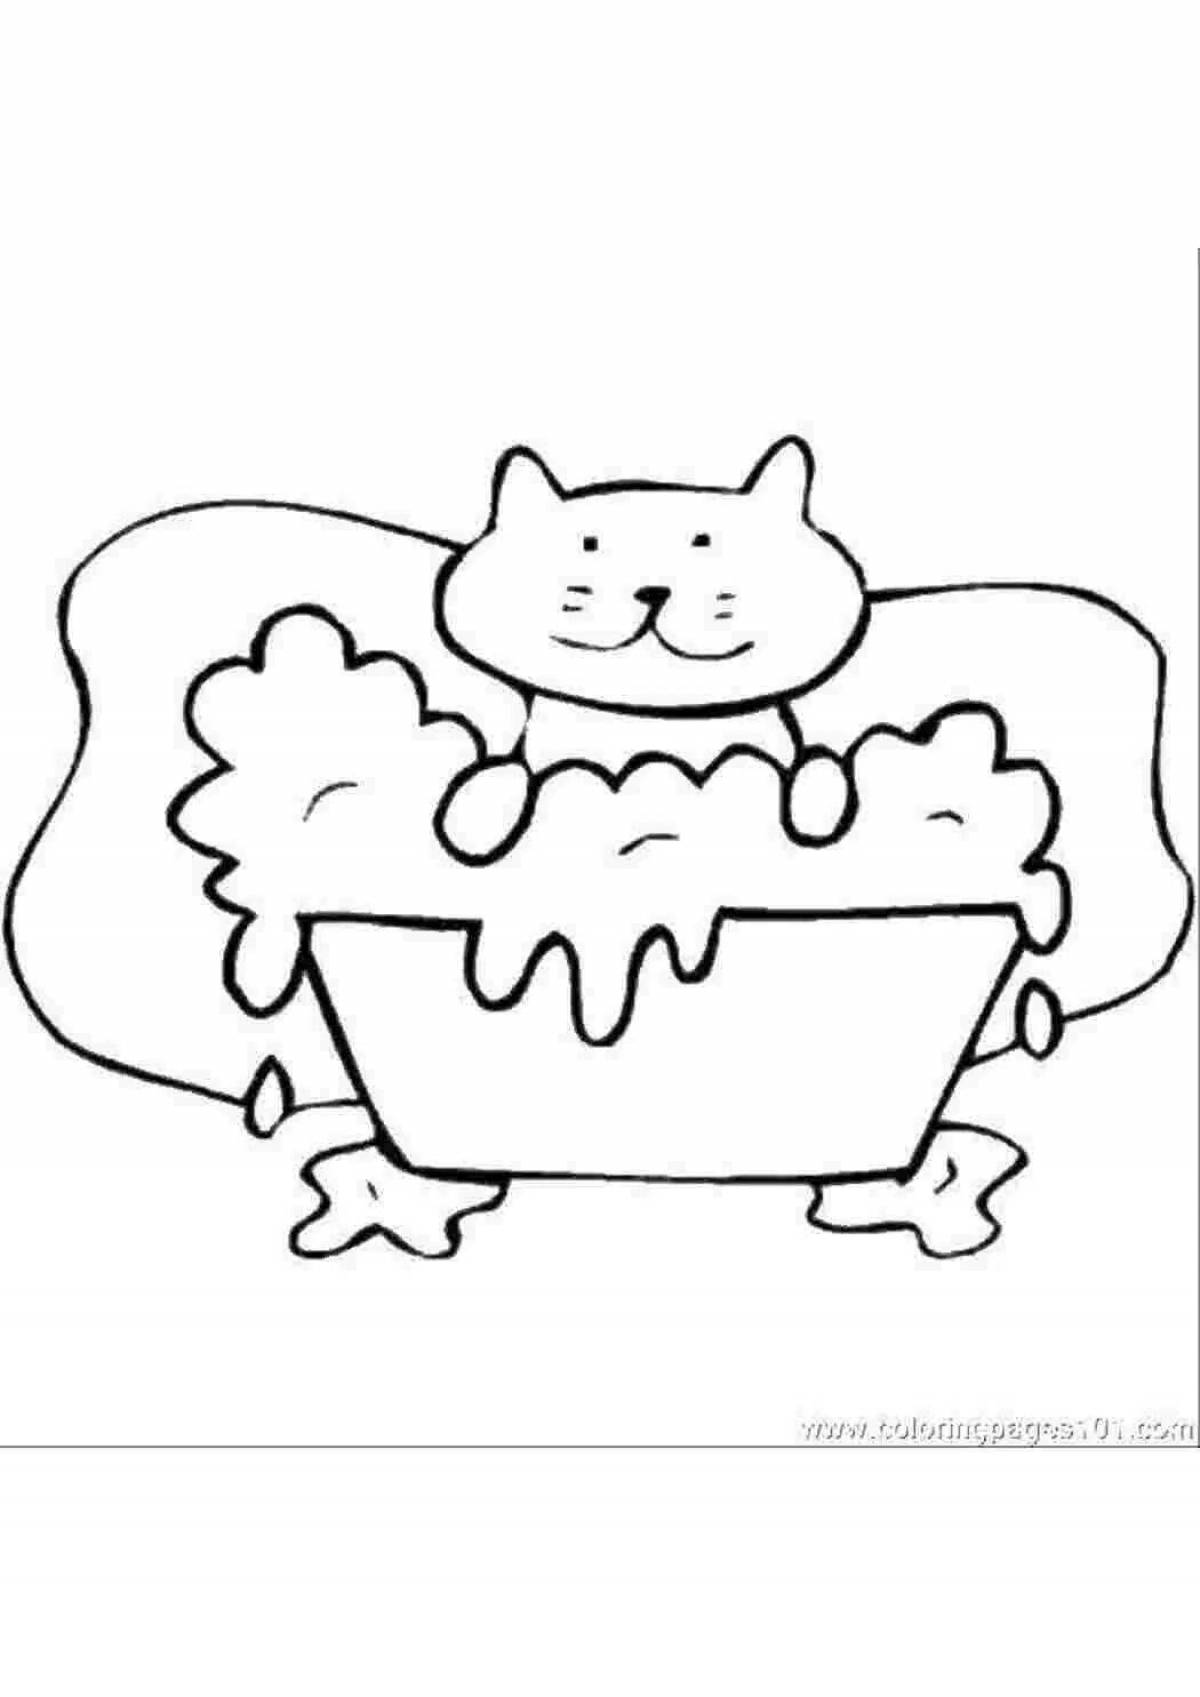 Coloring page happy cat in a cup